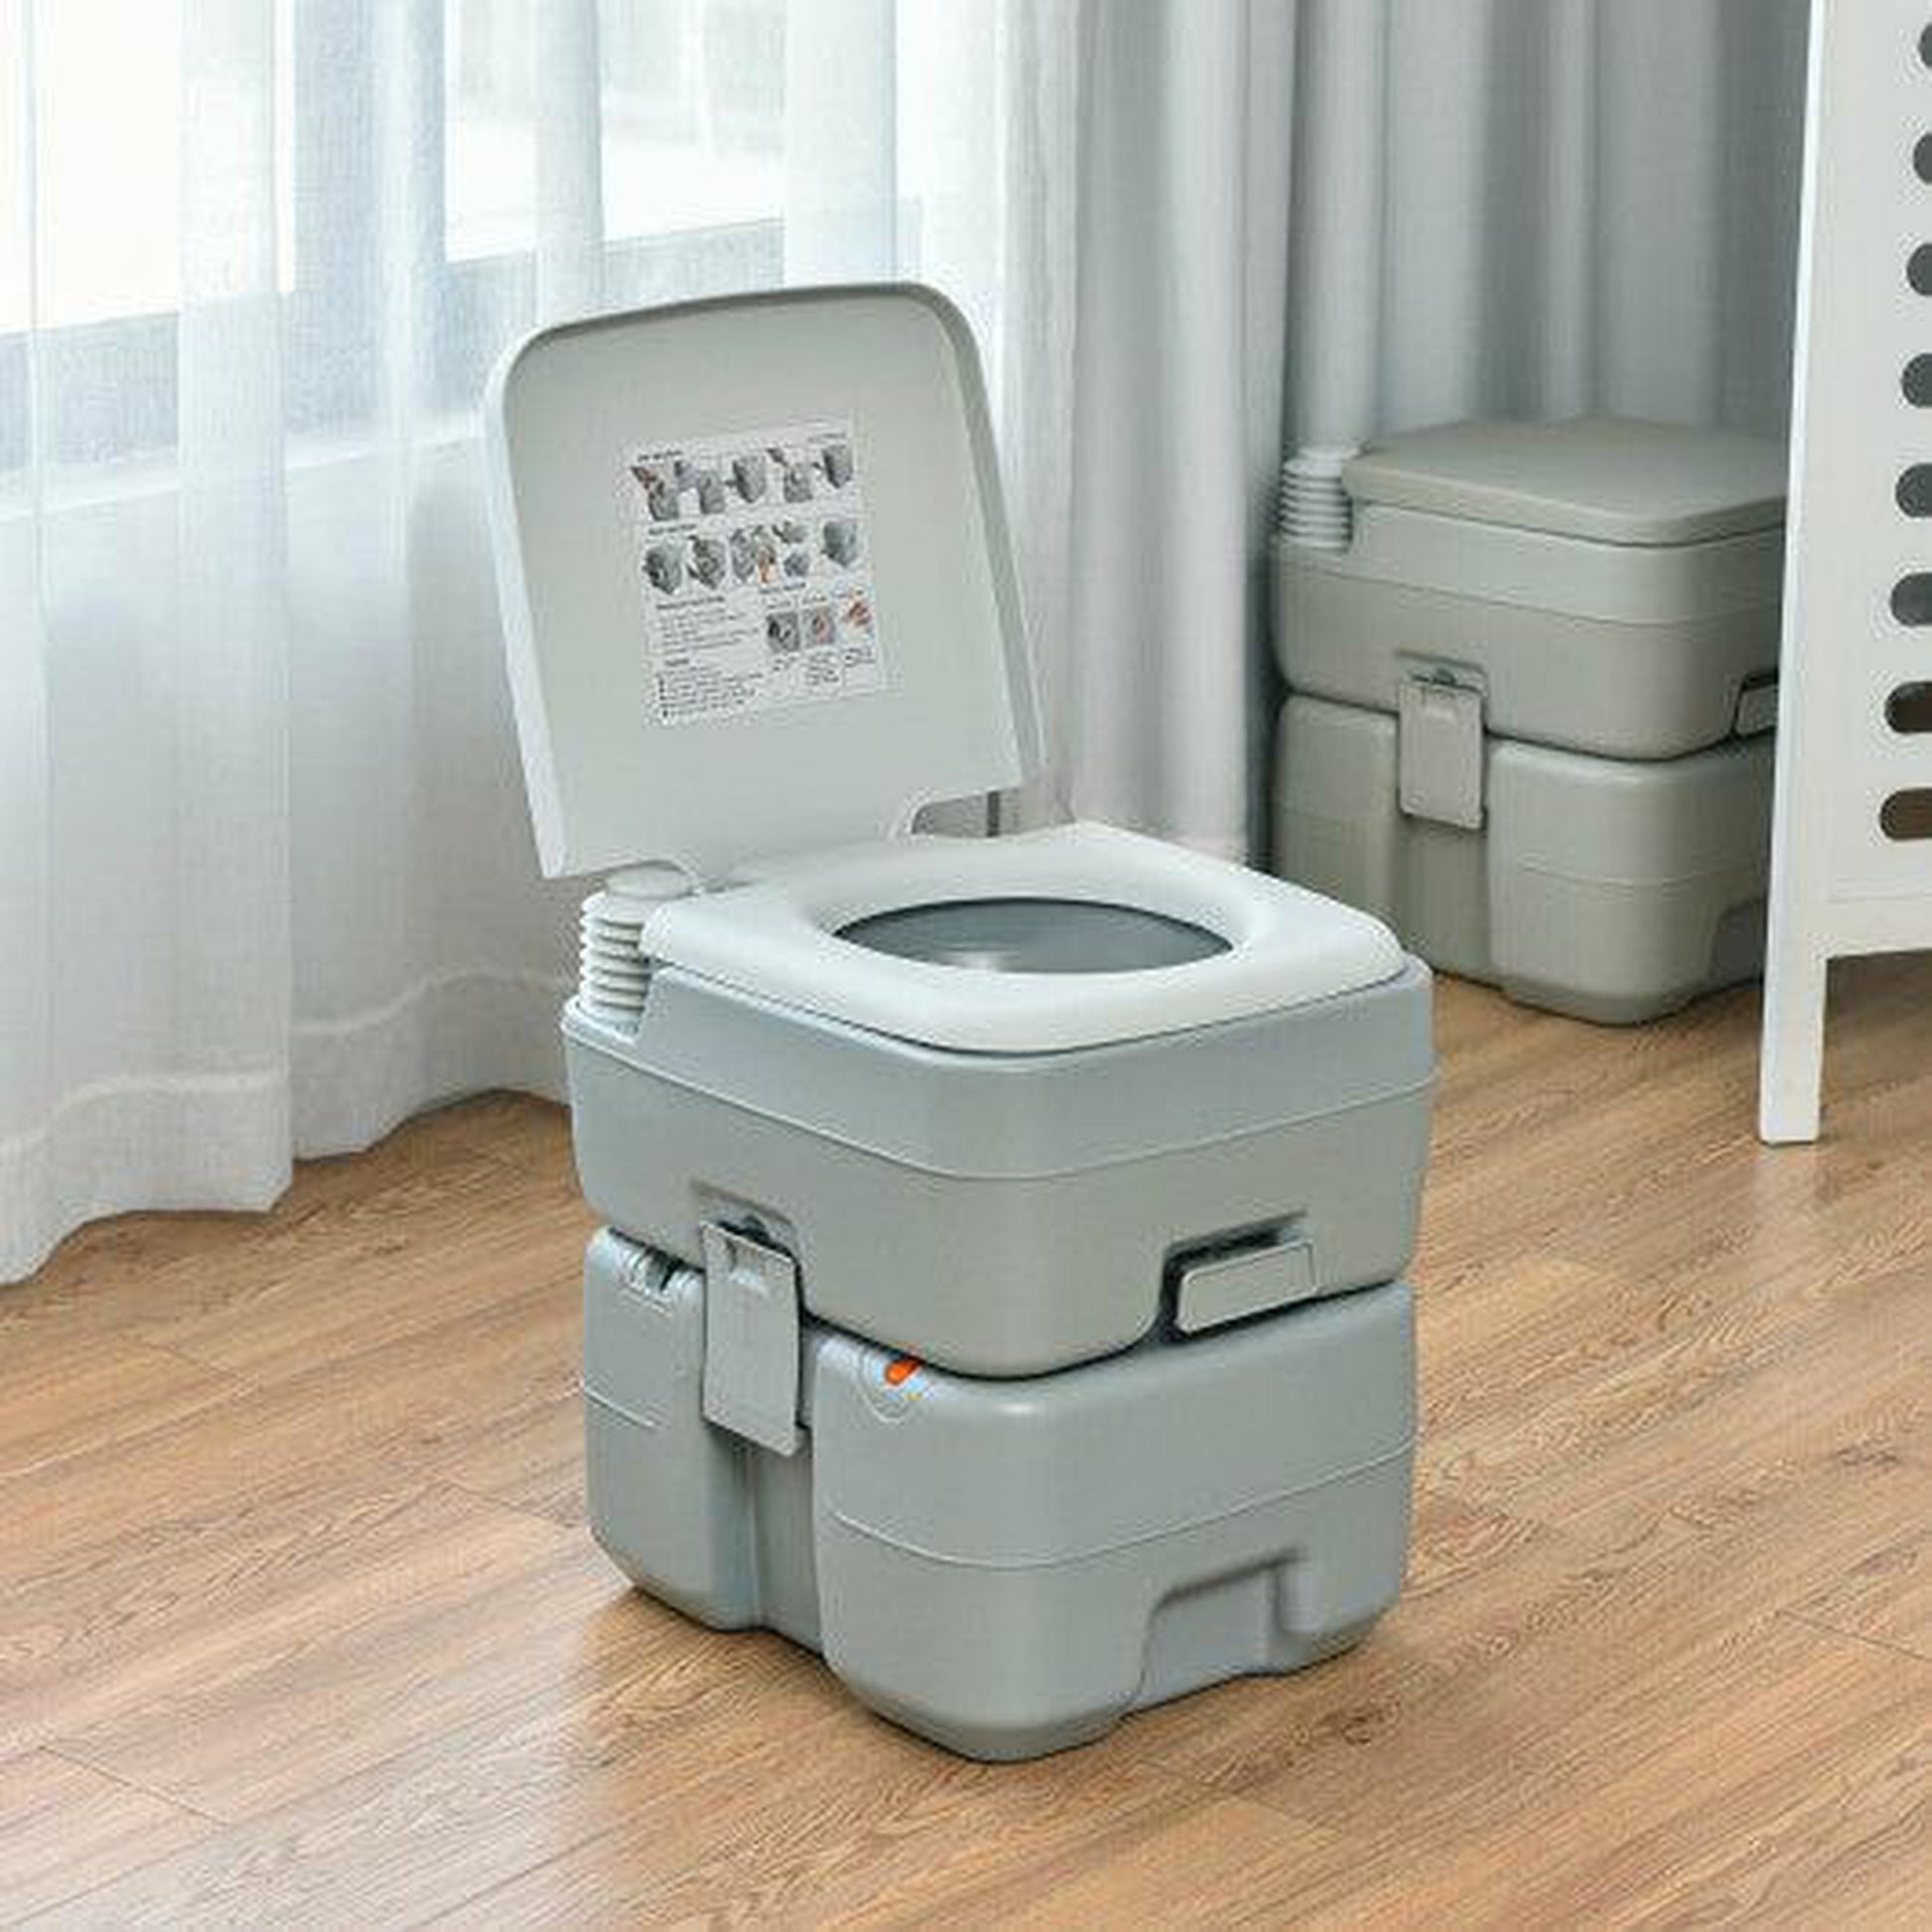 Costway 5.3 Gallon 20L Outdoor Portable Toilet with Level Indicator for RV Travel Camping